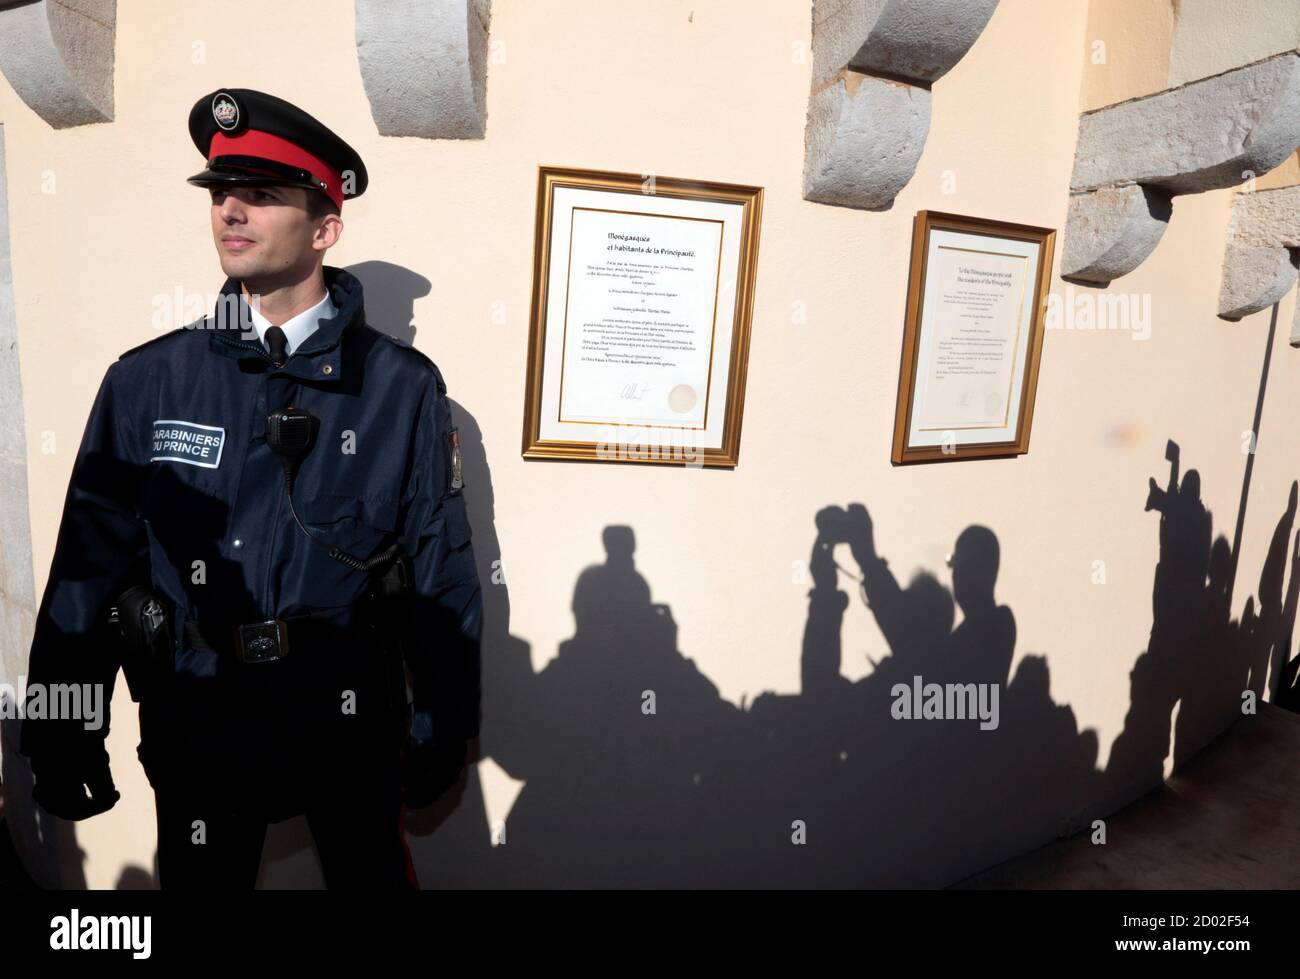 Shadows of photographers are cast on the wall near a carabinieri who stands next to the official declaration of Prince Albert II announcing the birth of twins to the Prince and Princess Charlene, at Monaco Palace December 11, 2014. Princess Charlene of Monaco gave birth on Wednesday to a boy and a girl, the royal couple's first children, an aide to the royals said. According to Monaco's Constitution the boy, named Jacques, will be first-in-line to the throne, and not his twin sister, Gabriella.  REUTERS/Eric Gaillard (MONACO - Tags: ROYALS ENTERTAINMENT) Stock Photo